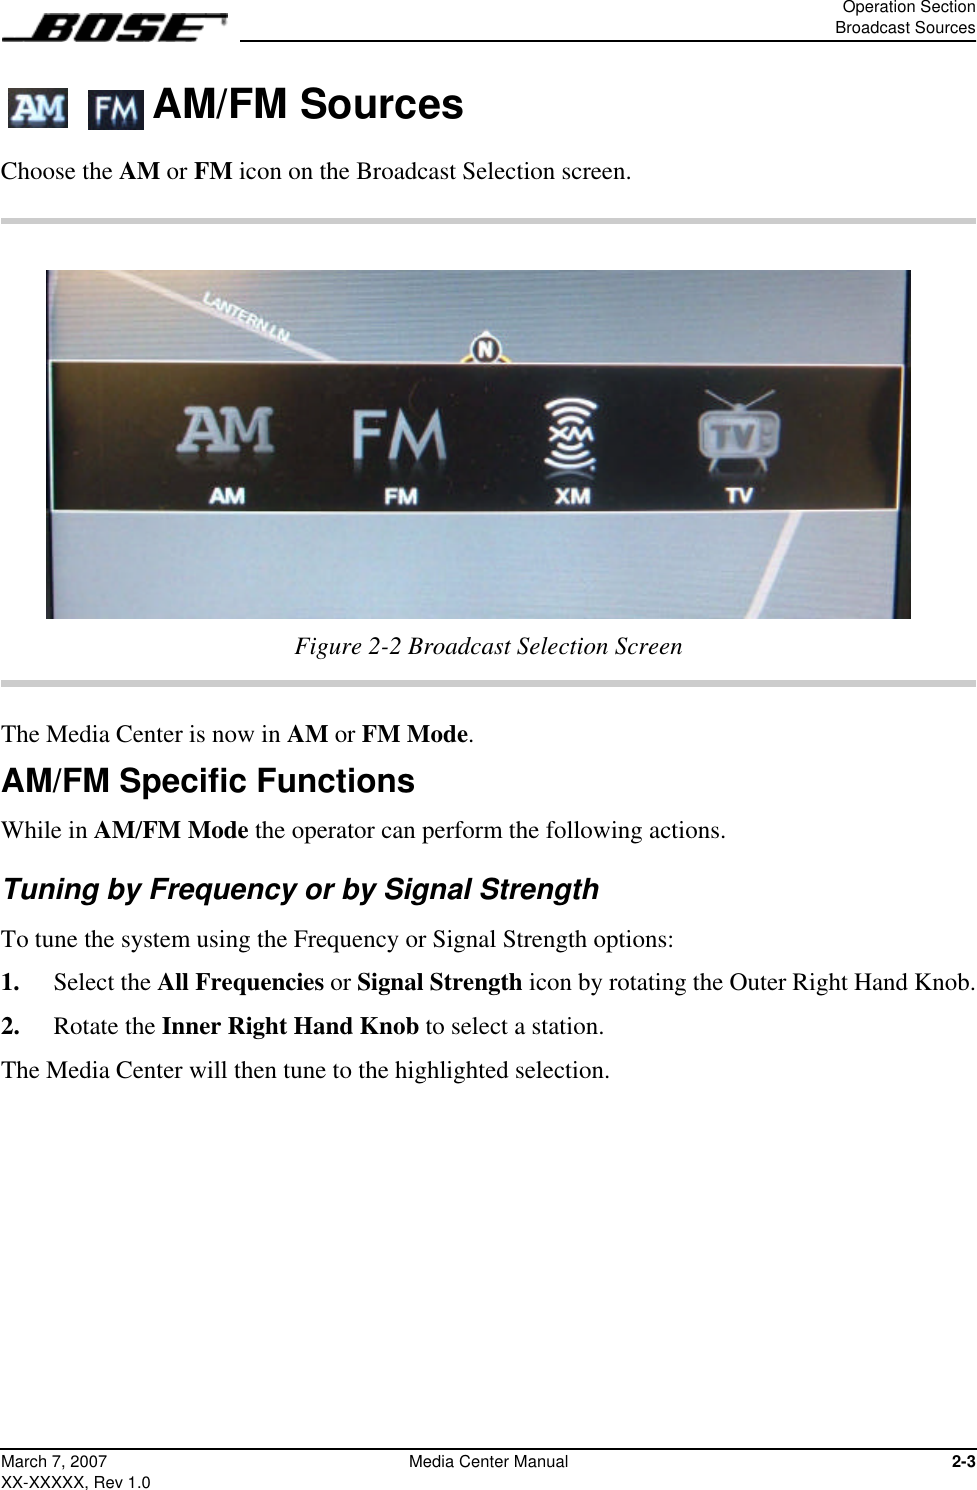 Operation SectionBroadcast Sources2-3March 7, 2007XX-XXXXX, Rev 1.0Media Center Manual  AM/FM SourcesChoose the AM or FM icon on the Broadcast Selection screen.Figure 2-2 Broadcast Selection ScreenThe Media Center is now in AM or FM Mode.AM/FM Specific FunctionsWhile in AM/FM Mode the operator can perform the following actions.Tuning by Frequency or by Signal StrengthTo tune the system using the Frequency or Signal Strength options:1.  Select the All Frequencies or Signal Strength icon by rotating the Outer Right Hand Knob.2.  Rotate the Inner Right Hand Knob to select a station.The Media Center will then tune to the highlighted selection.